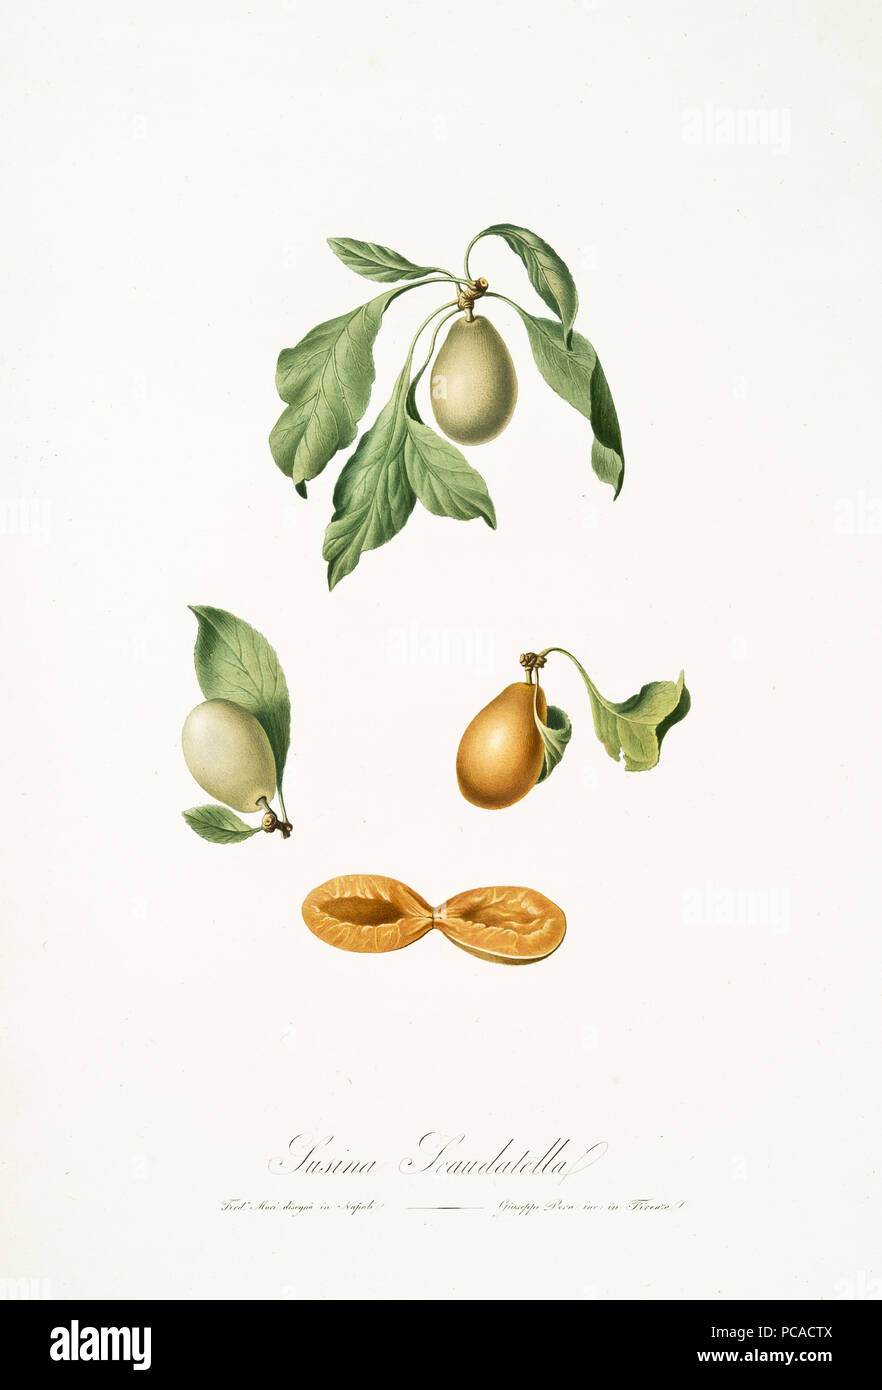 Plums with their leaves on white background and single plum half section. Old botanical illustration realized with a detailed watercolor by Giorgio Gallesio on 1817,1839 Italy Stock Photo